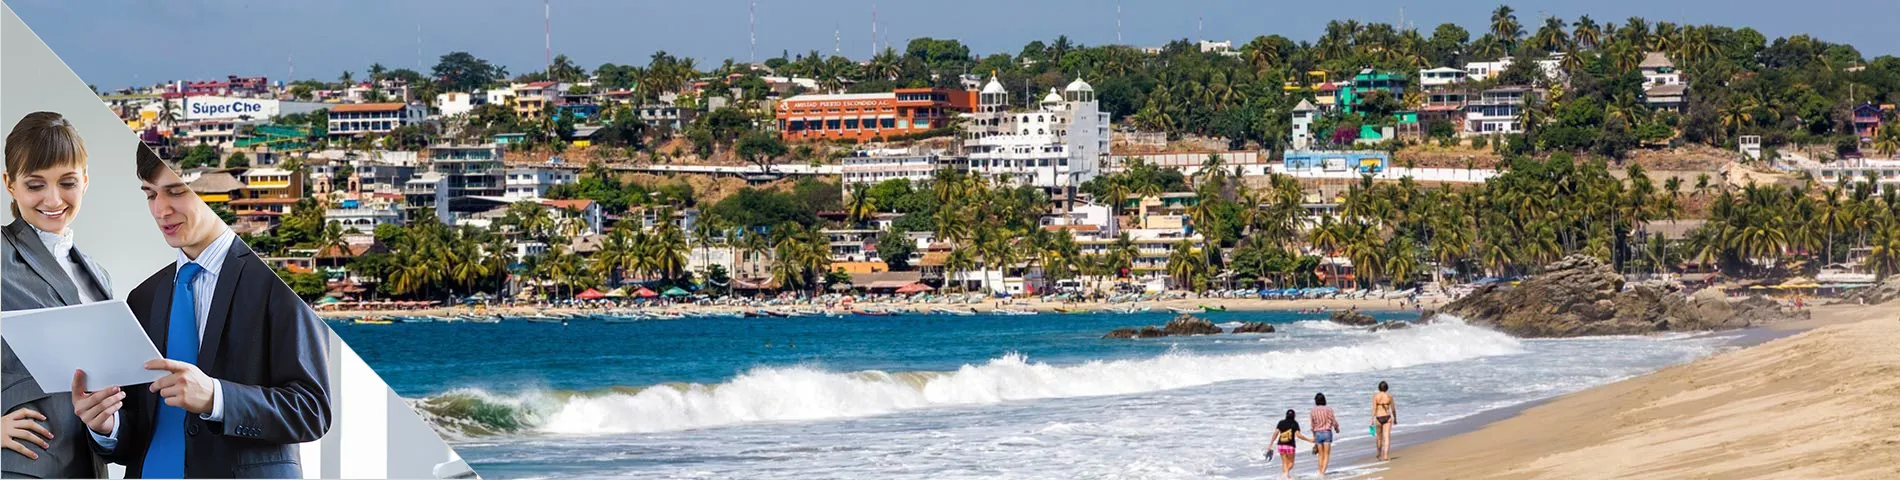 Puerto Escondido - Business One-to-One